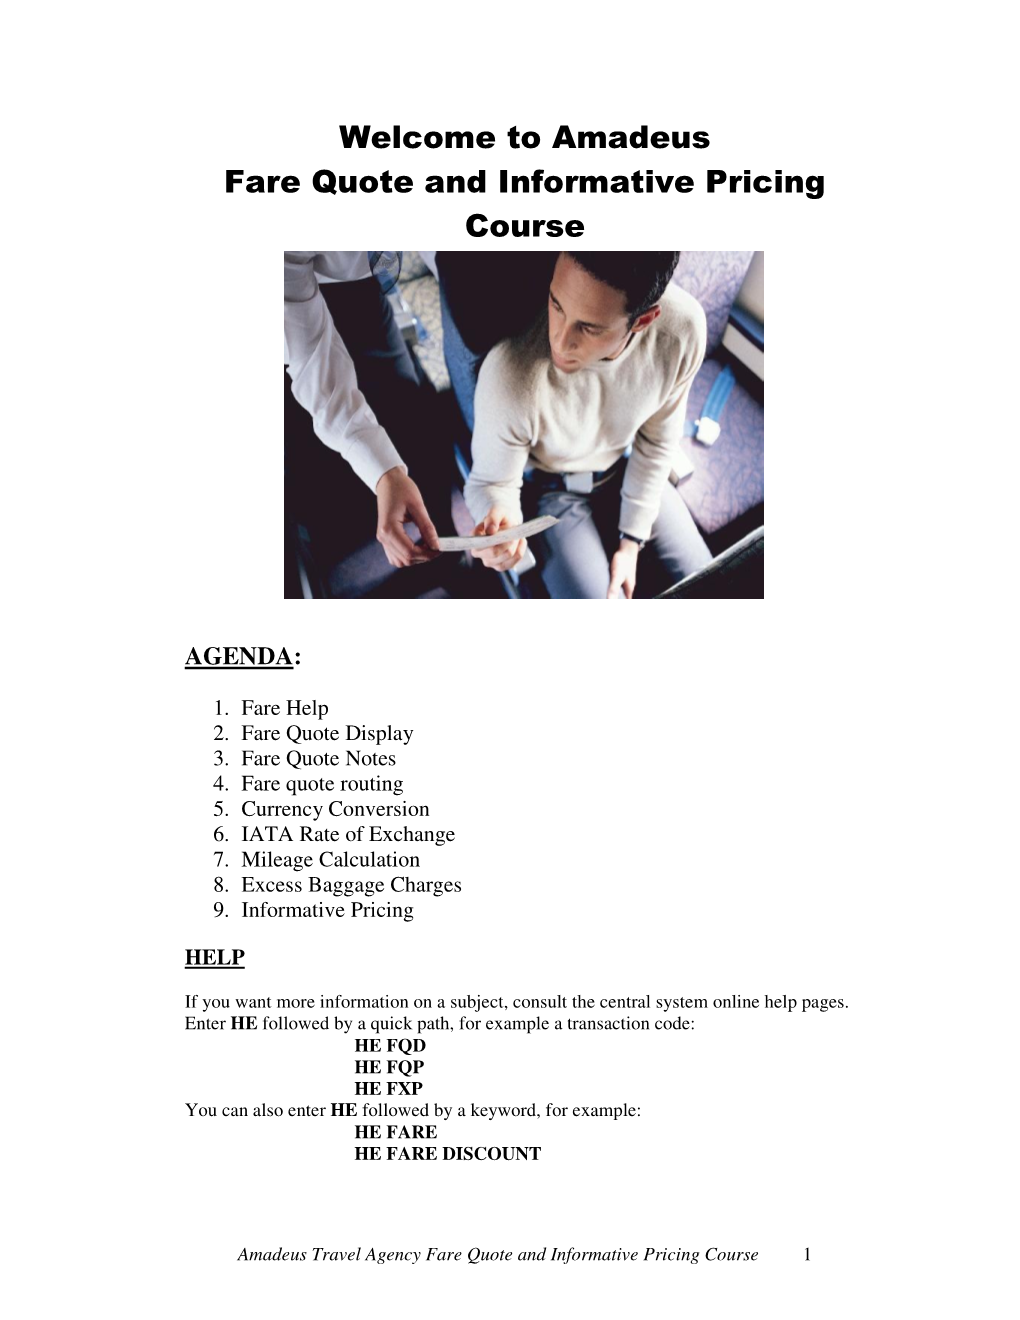 Welcome to Amadeus Fare Quote and Informative Pricing Course